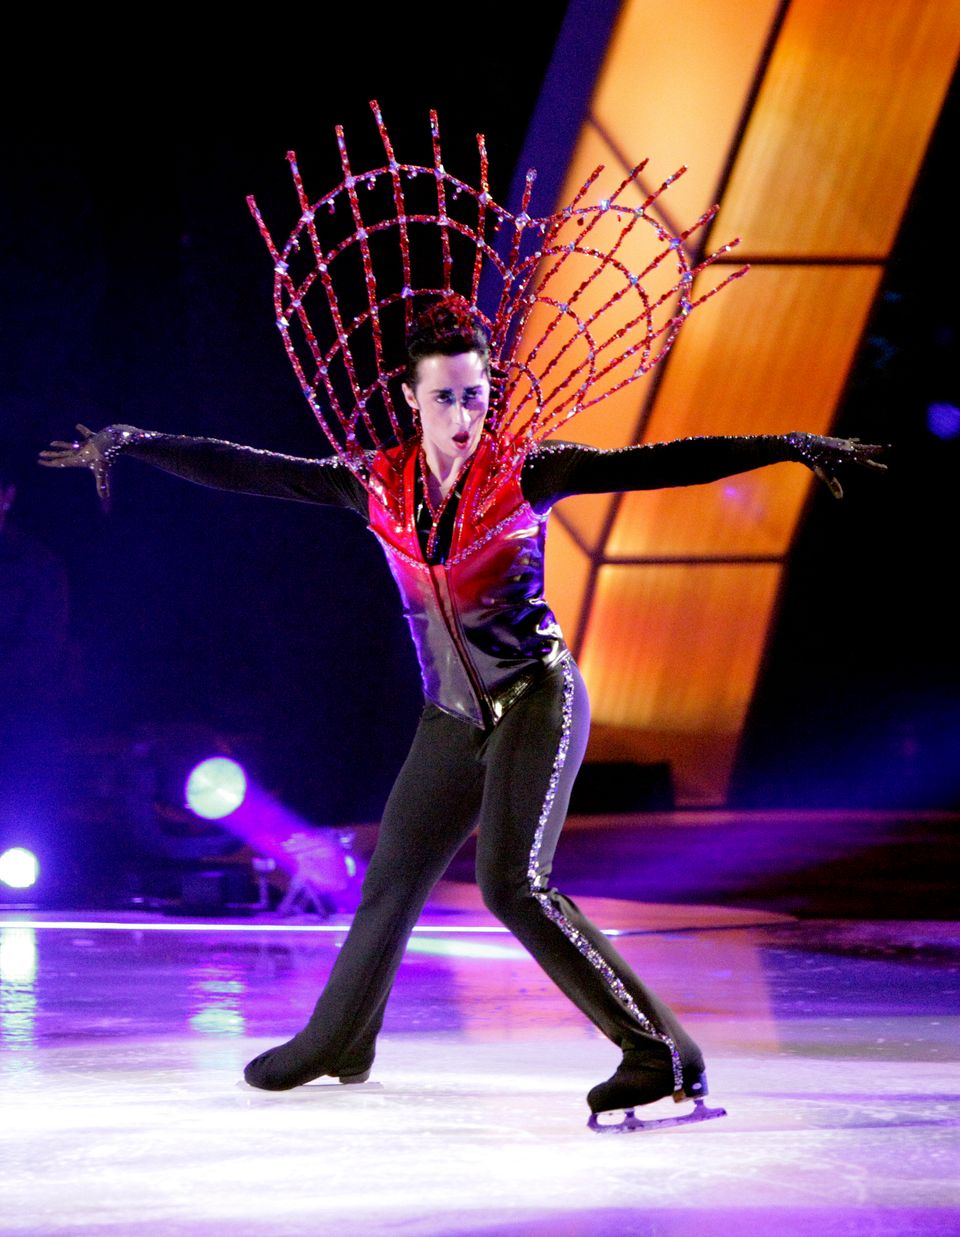 In Men's Figure Skating, the Glitzy Costumes Are Built to Win